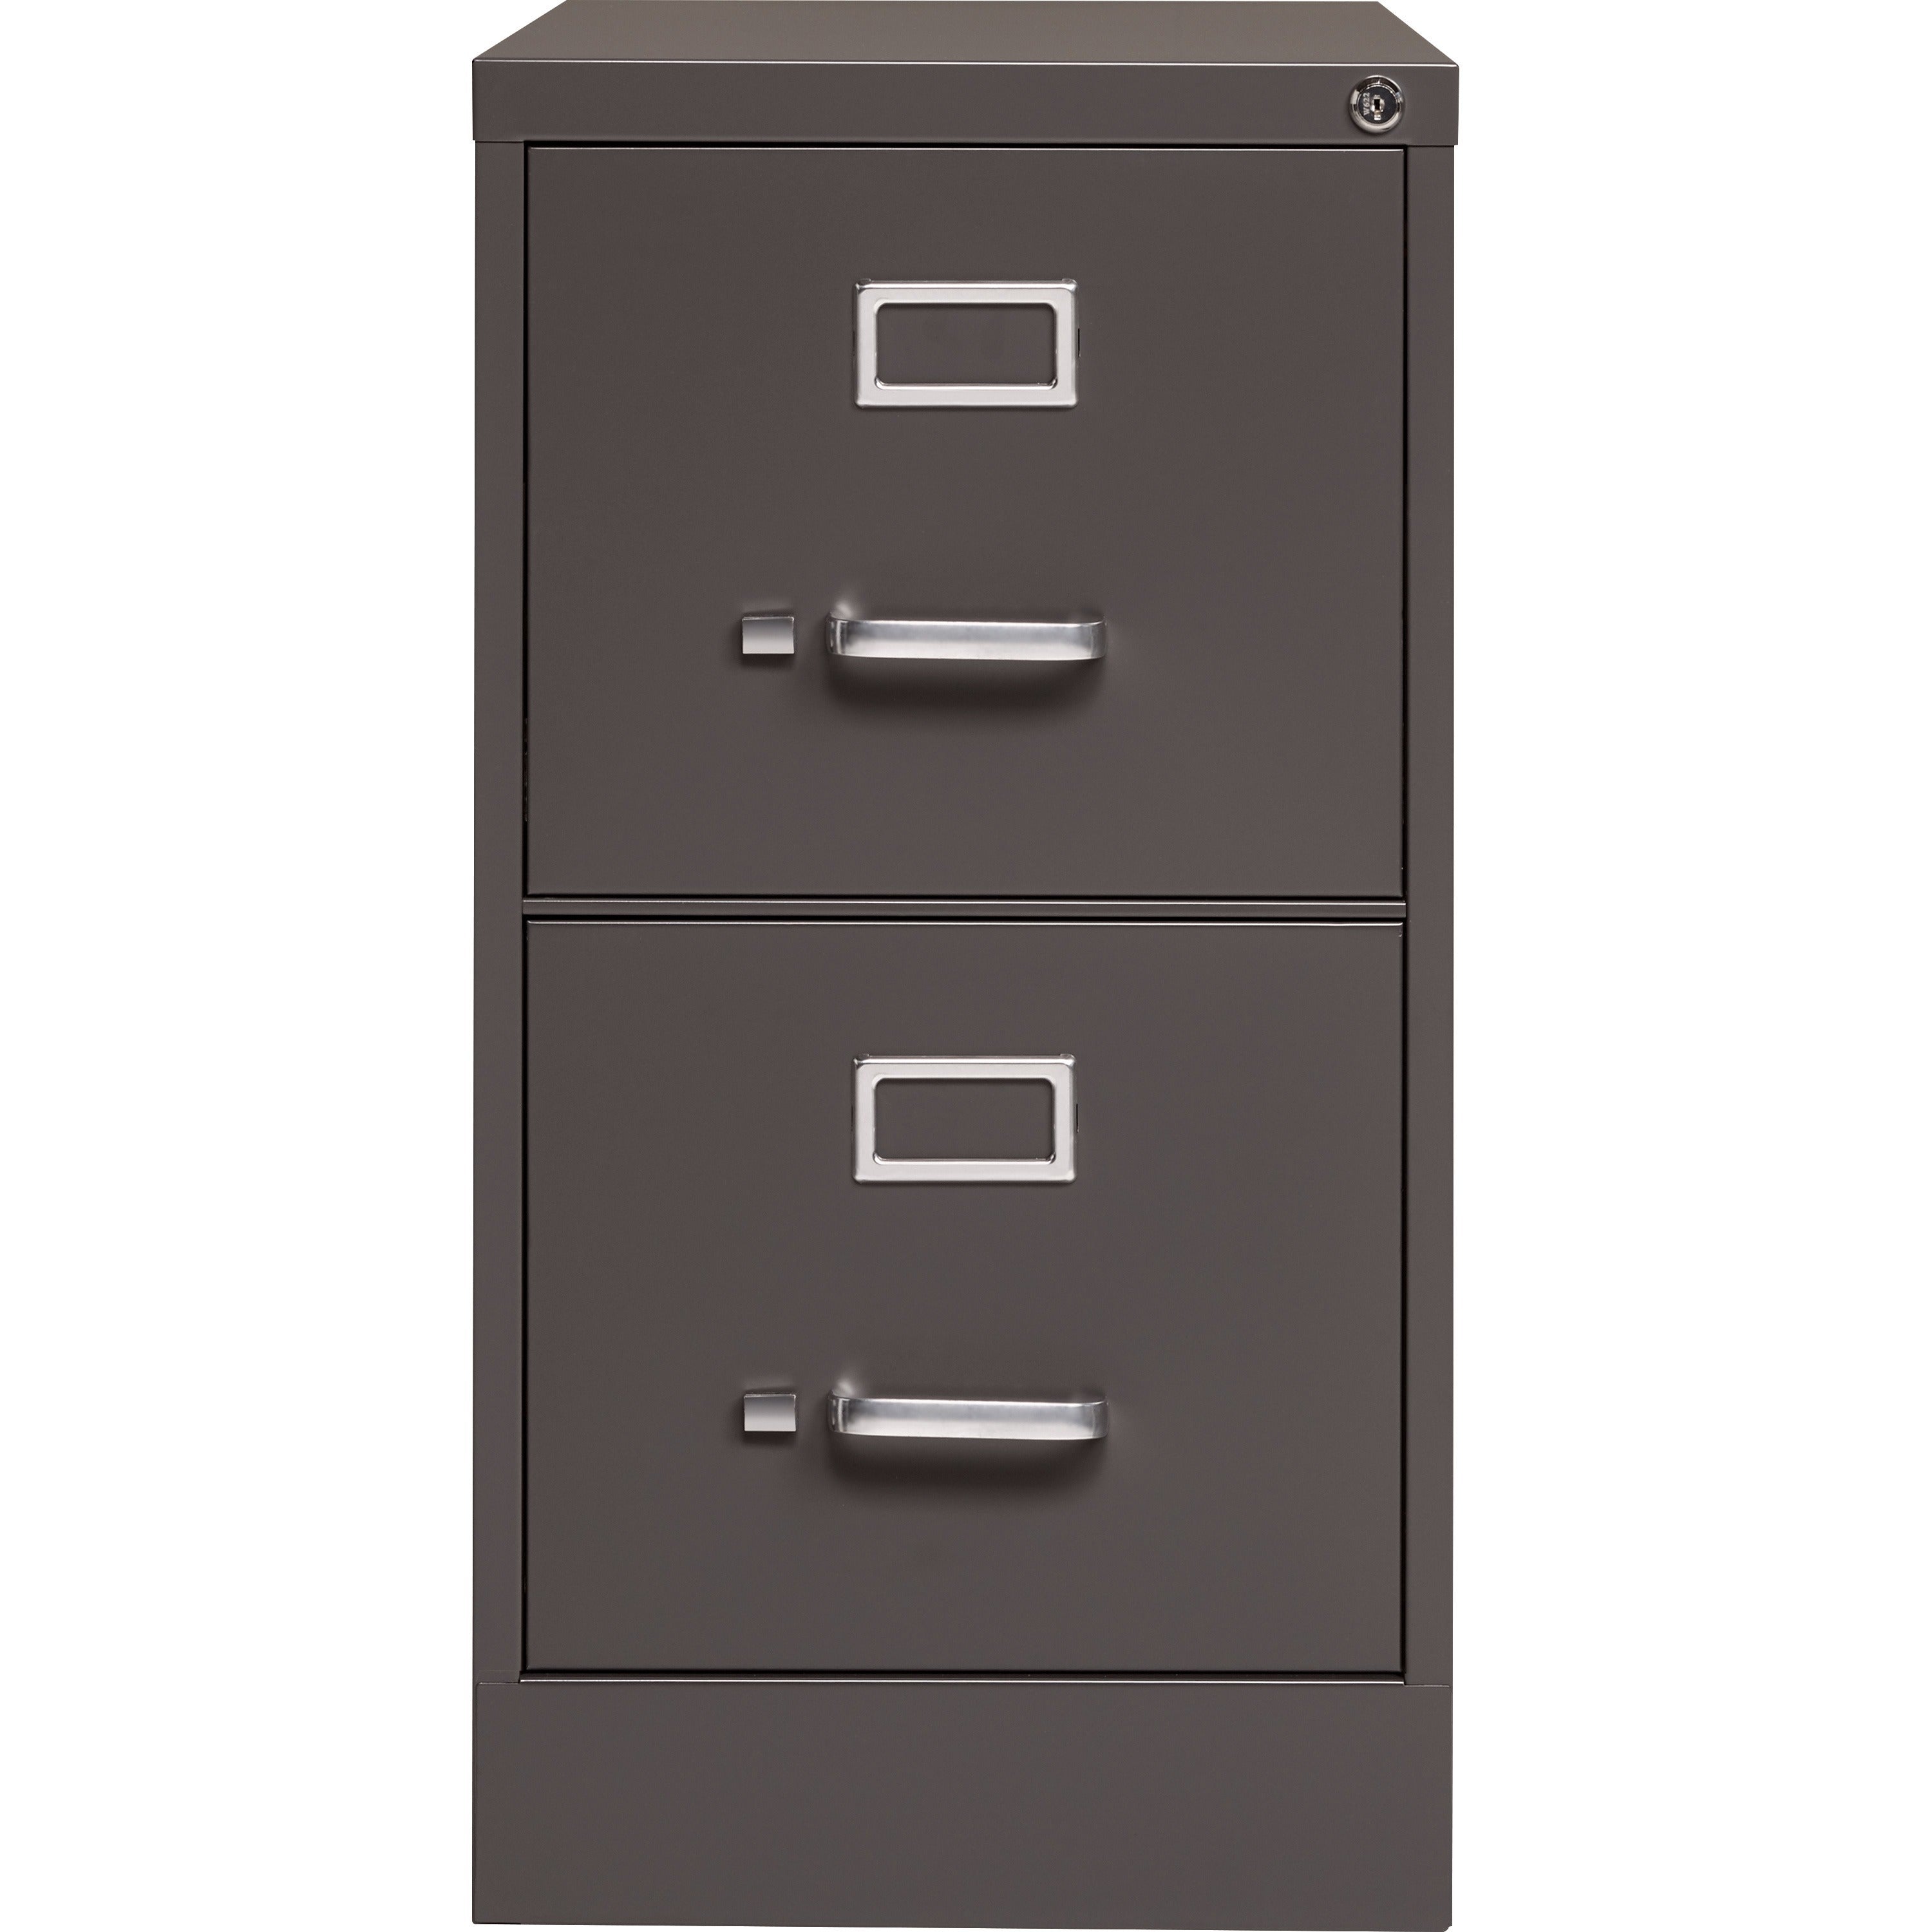 Lorell Fortress Series 26-1/2" Commercial-Grade Vertical File Cabinet - 15" x 26.5" x 28.4" - 2 x Drawer(s) for File - Letter - Vertical - Label Holder, Drawer Extension, Ball-bearing Suspension, Heavy Duty, Security Lock - Medium Tone - Steel - Recy - 